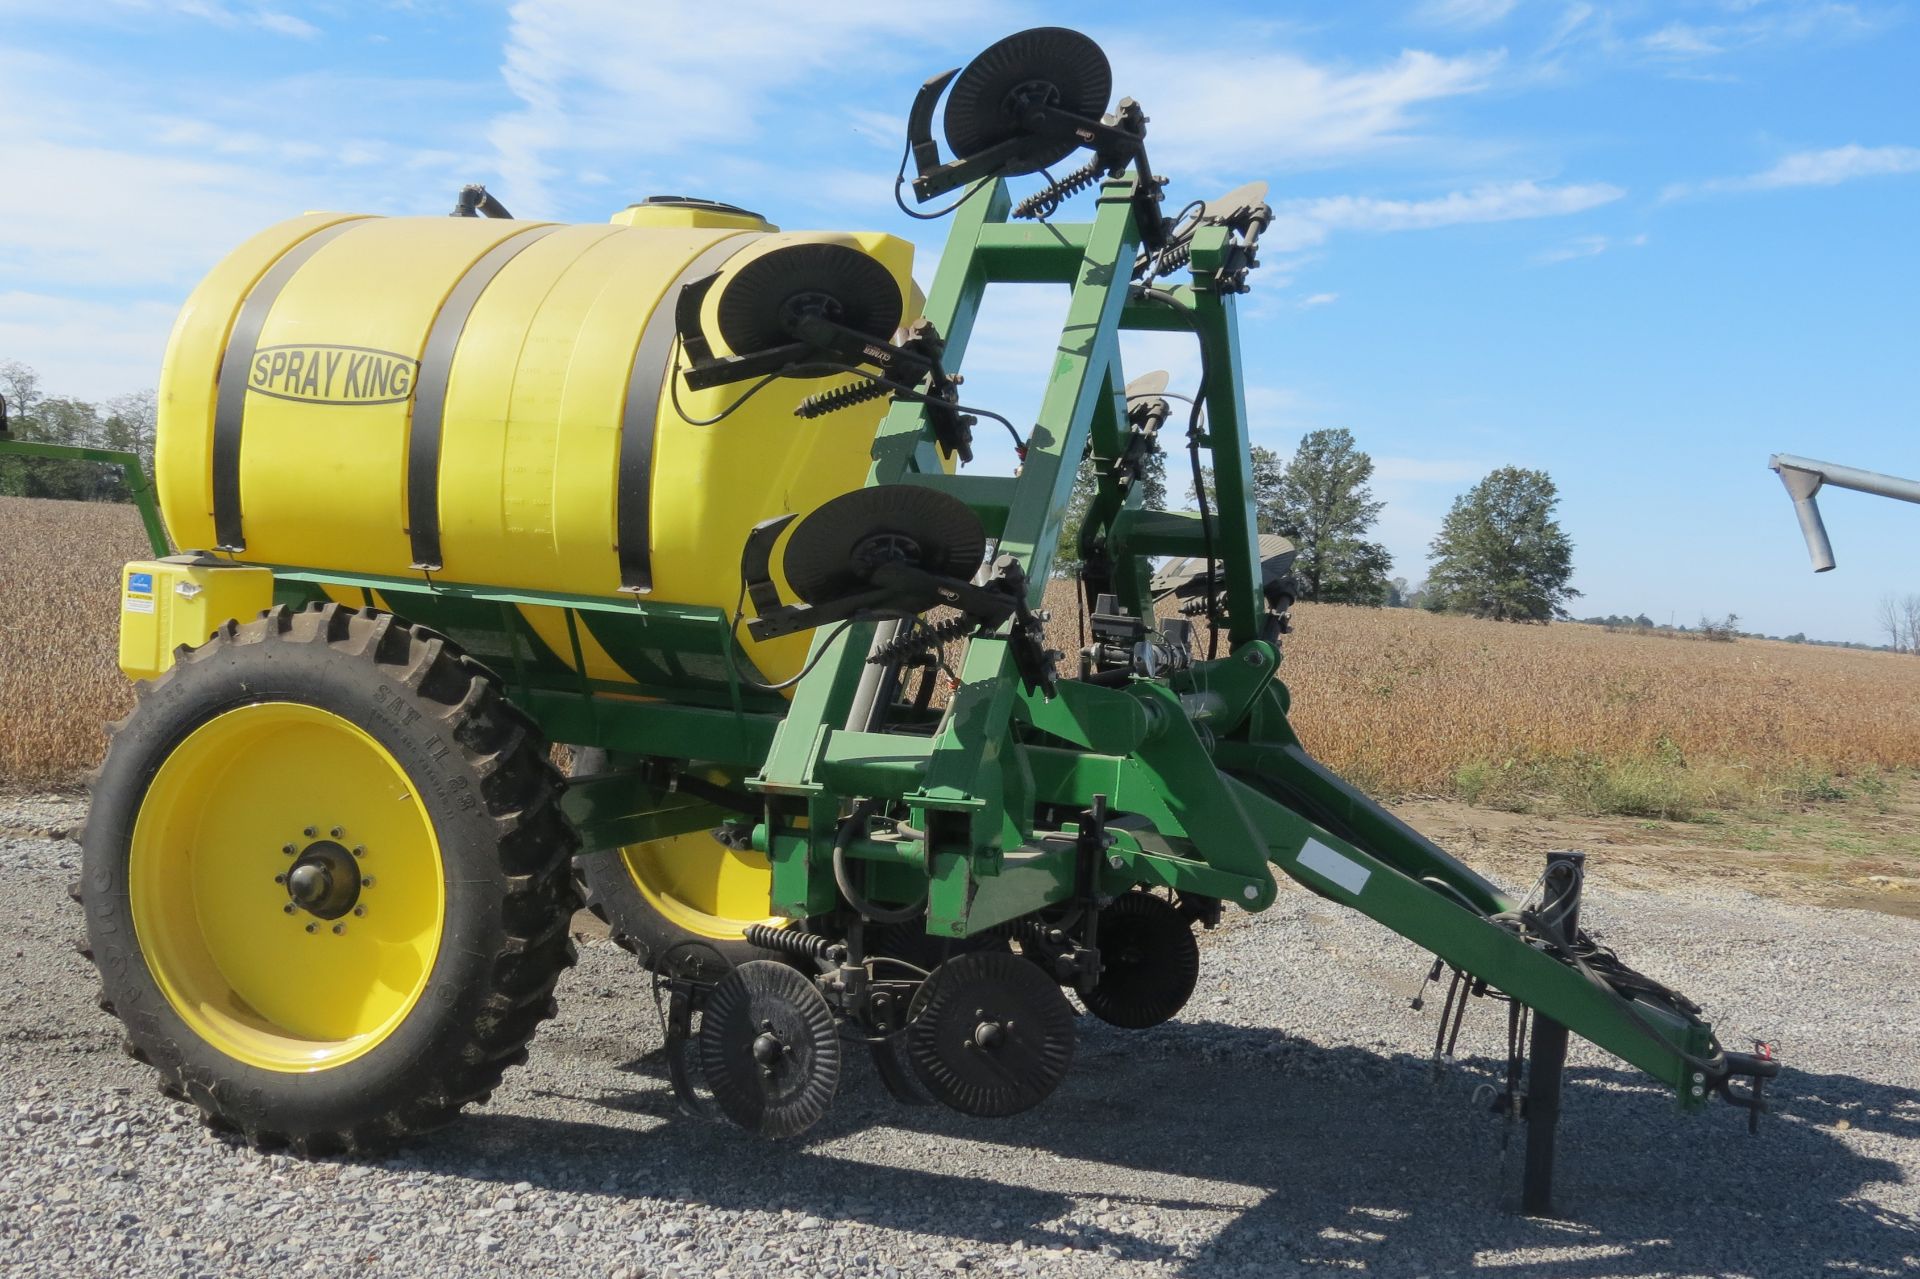 Spray King 11-coulter 28% applicator, 1300-gal poly tank, 15.5-38 tires, 2” fill, hyd SS 2” pump, - Image 2 of 22